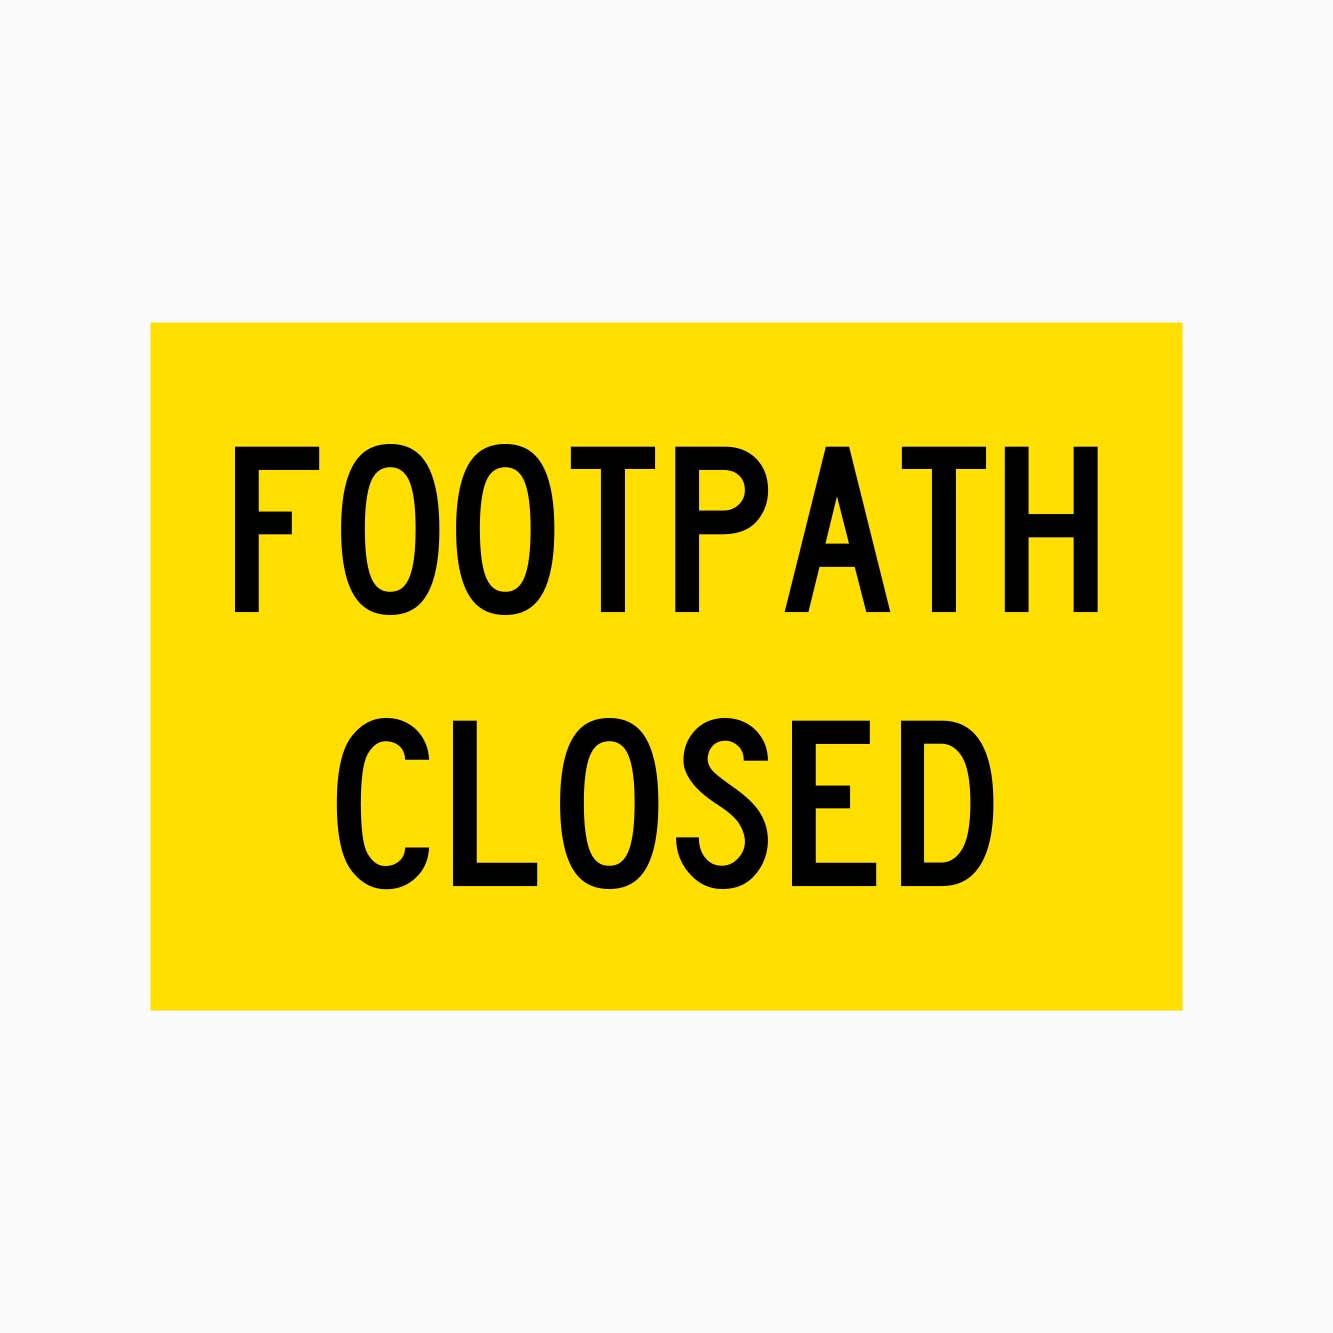 FOOTPATH CLOSED SIGN - GET SIGNS AUSTRALIA